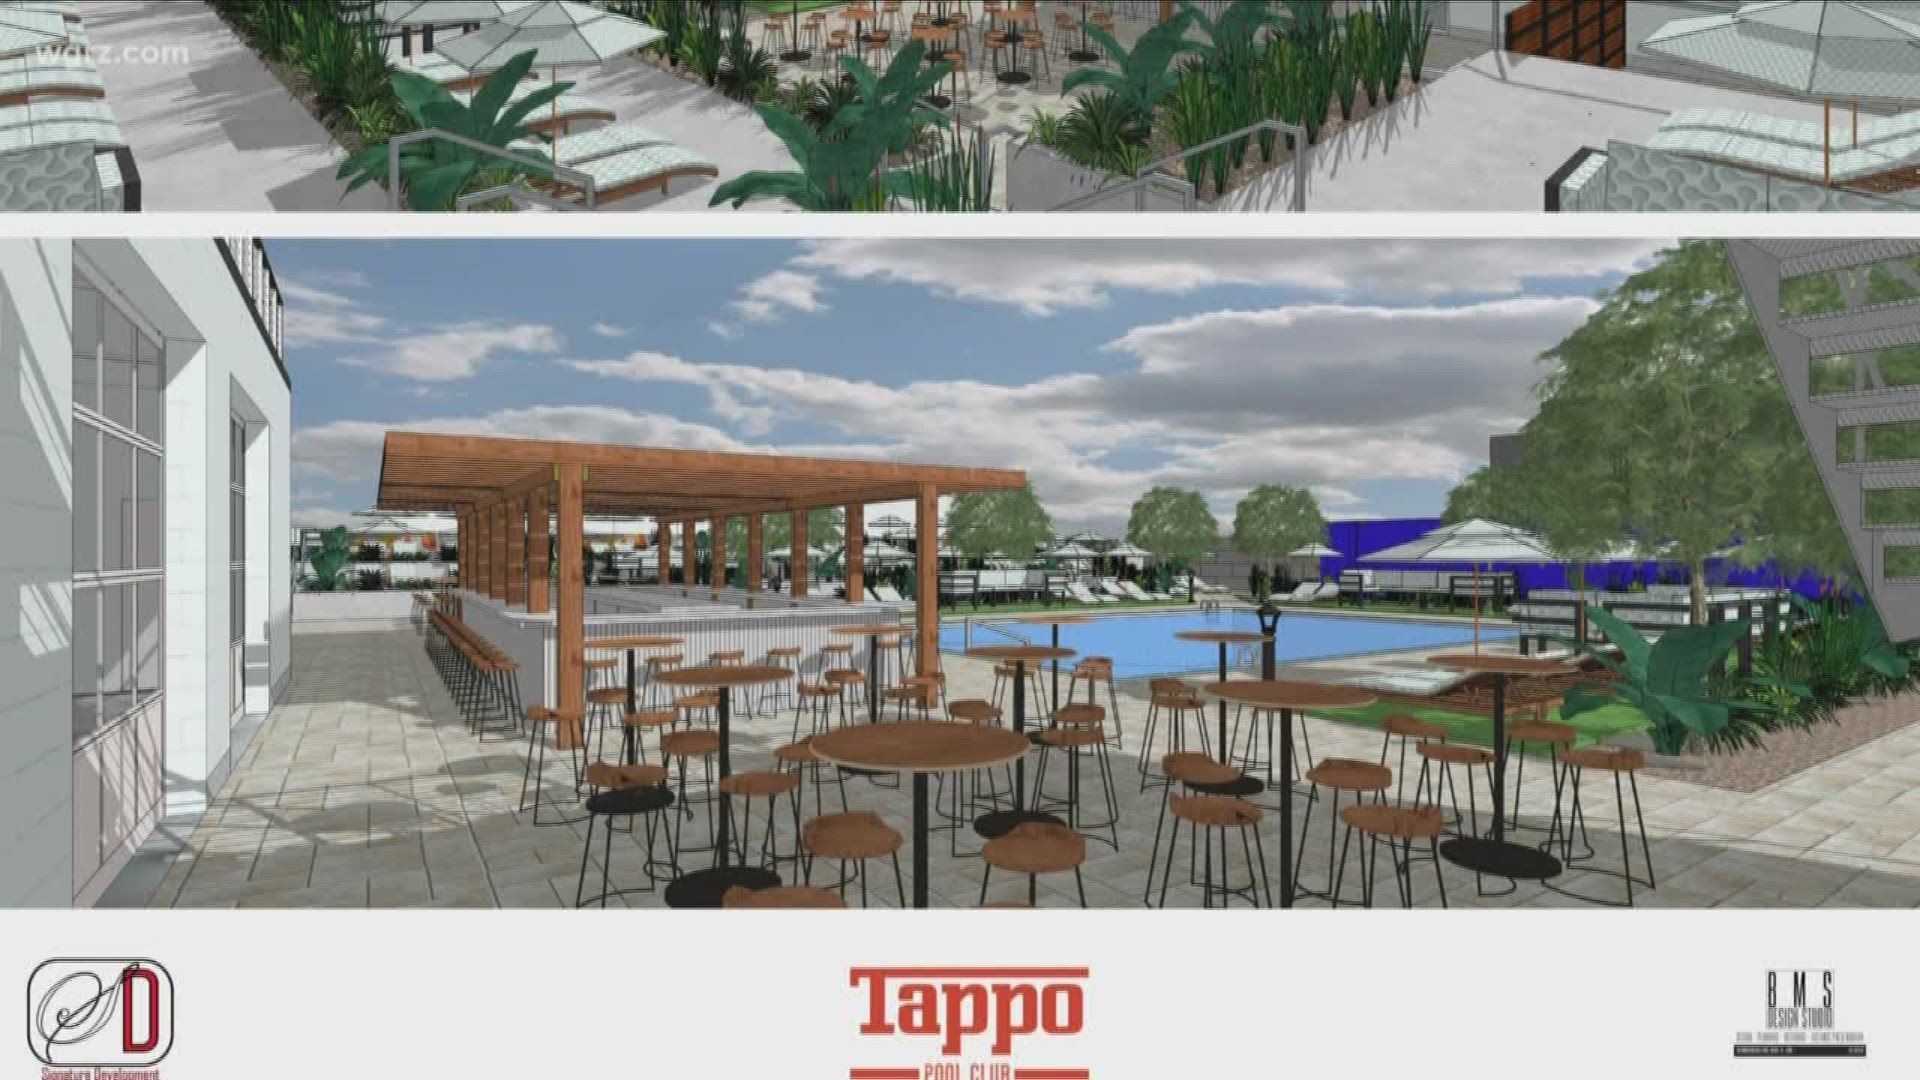 Termini hopes to start construction on the year-round attraction next month... and have it open by memorial day.